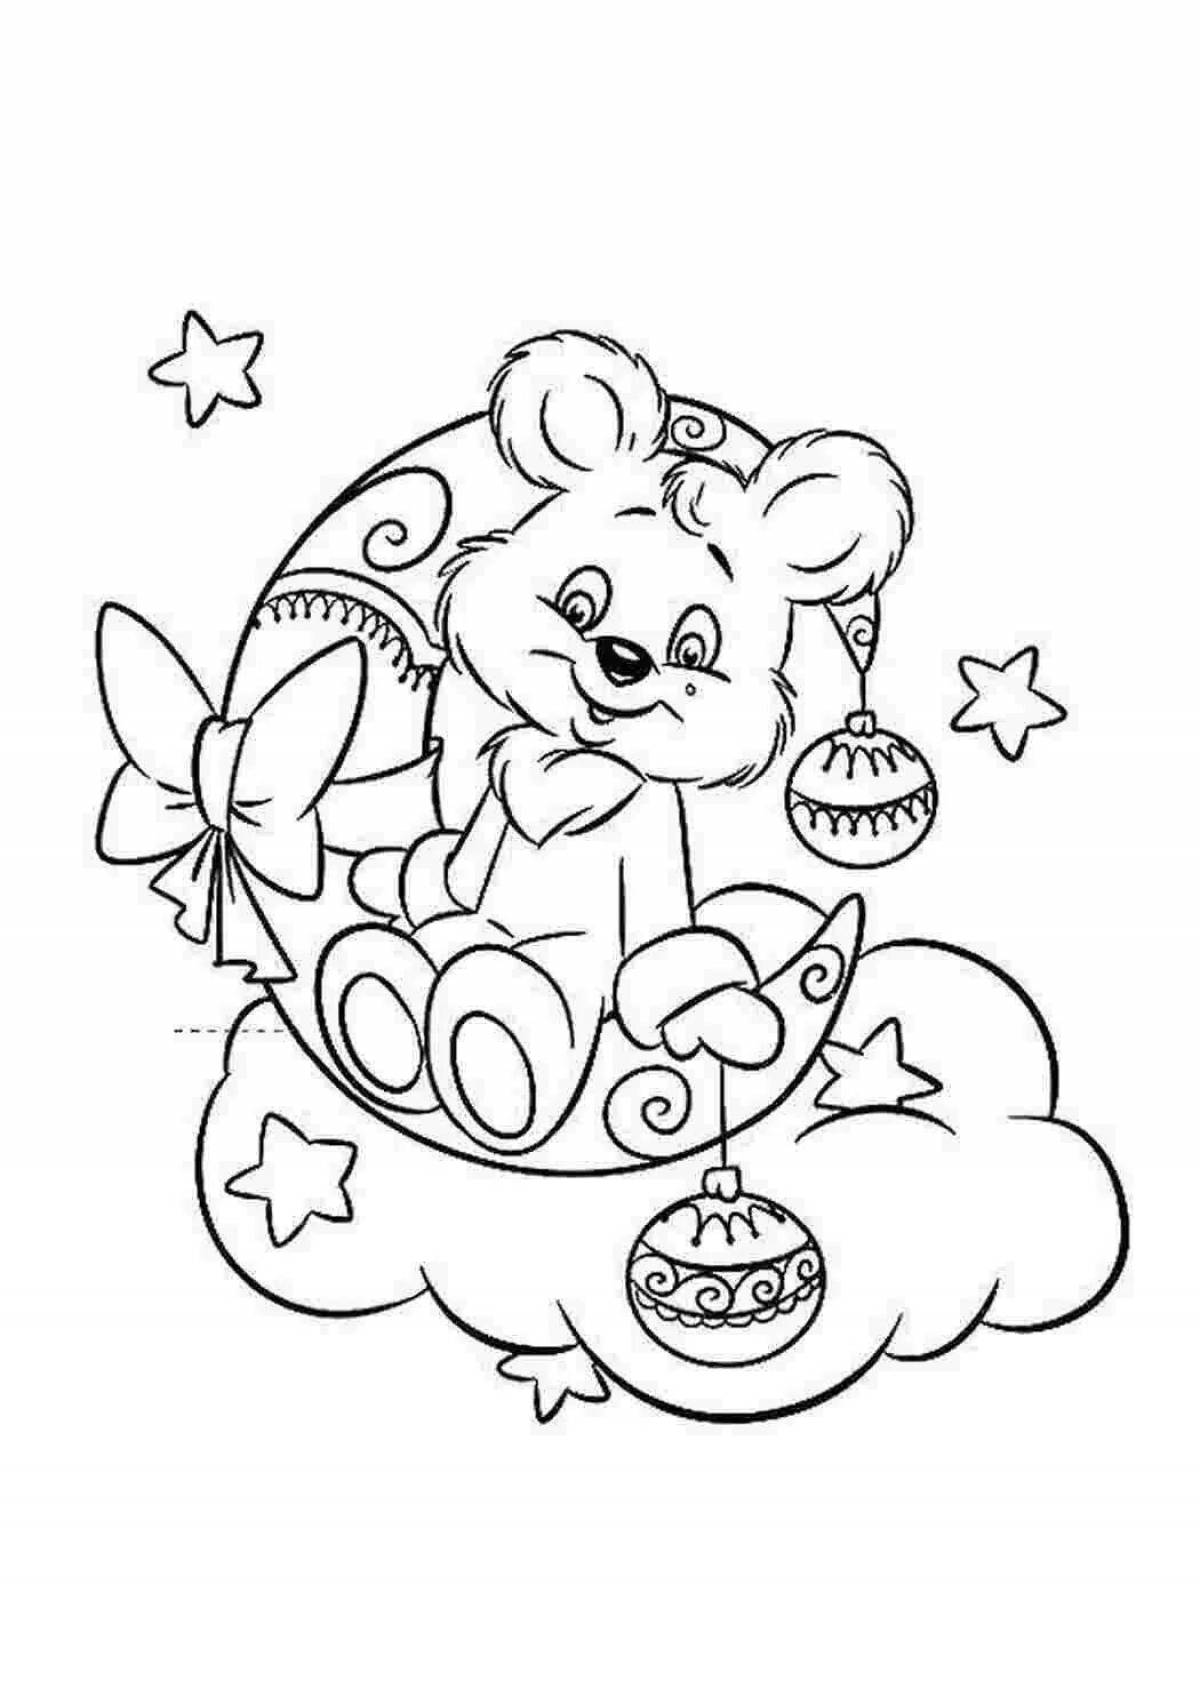 Coloring book nice bear on the moon